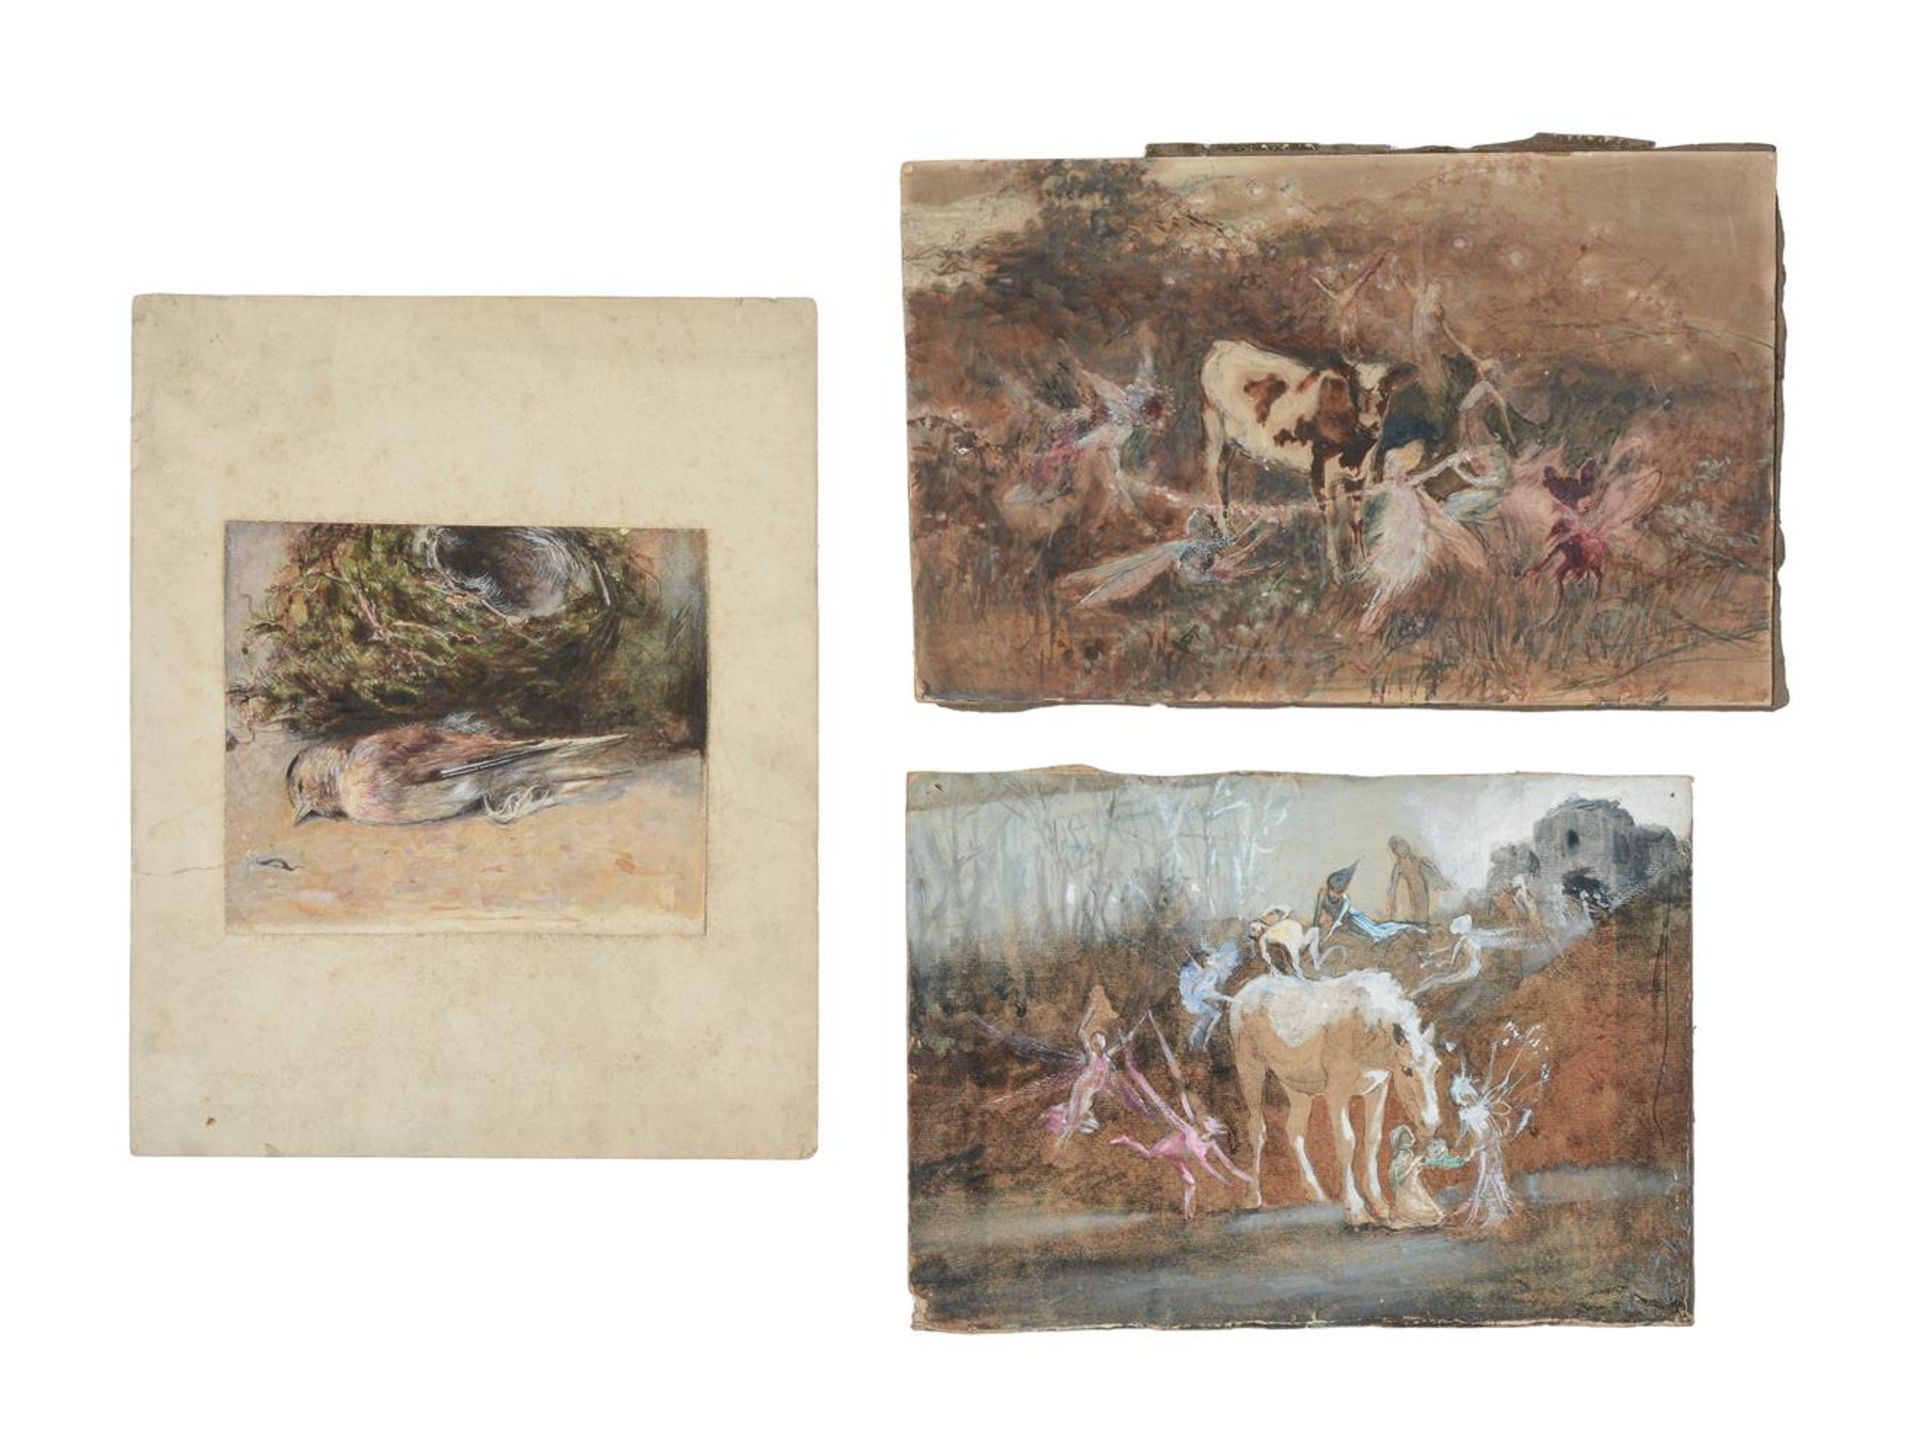 JOHN ANSTER FITZGERALD, FAIRIES PLAYING WITH A HORSE / FAIRIES PLAYING WITH A COW / A BIRD BY A NEST - Image 4 of 4